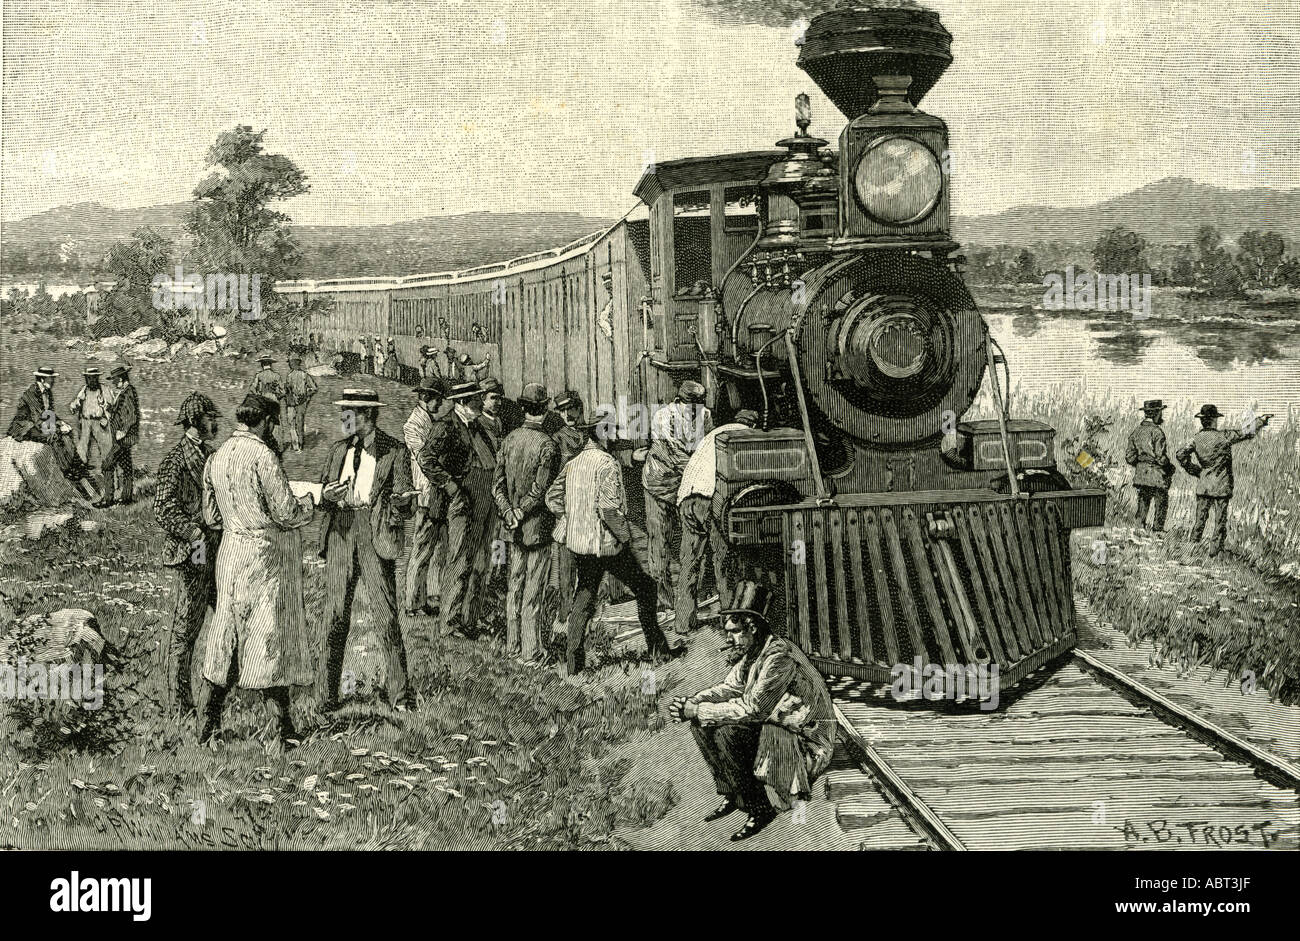 From Portland to the yellowstone Park. A breakdown on the line, 1891, USA Stock Photo